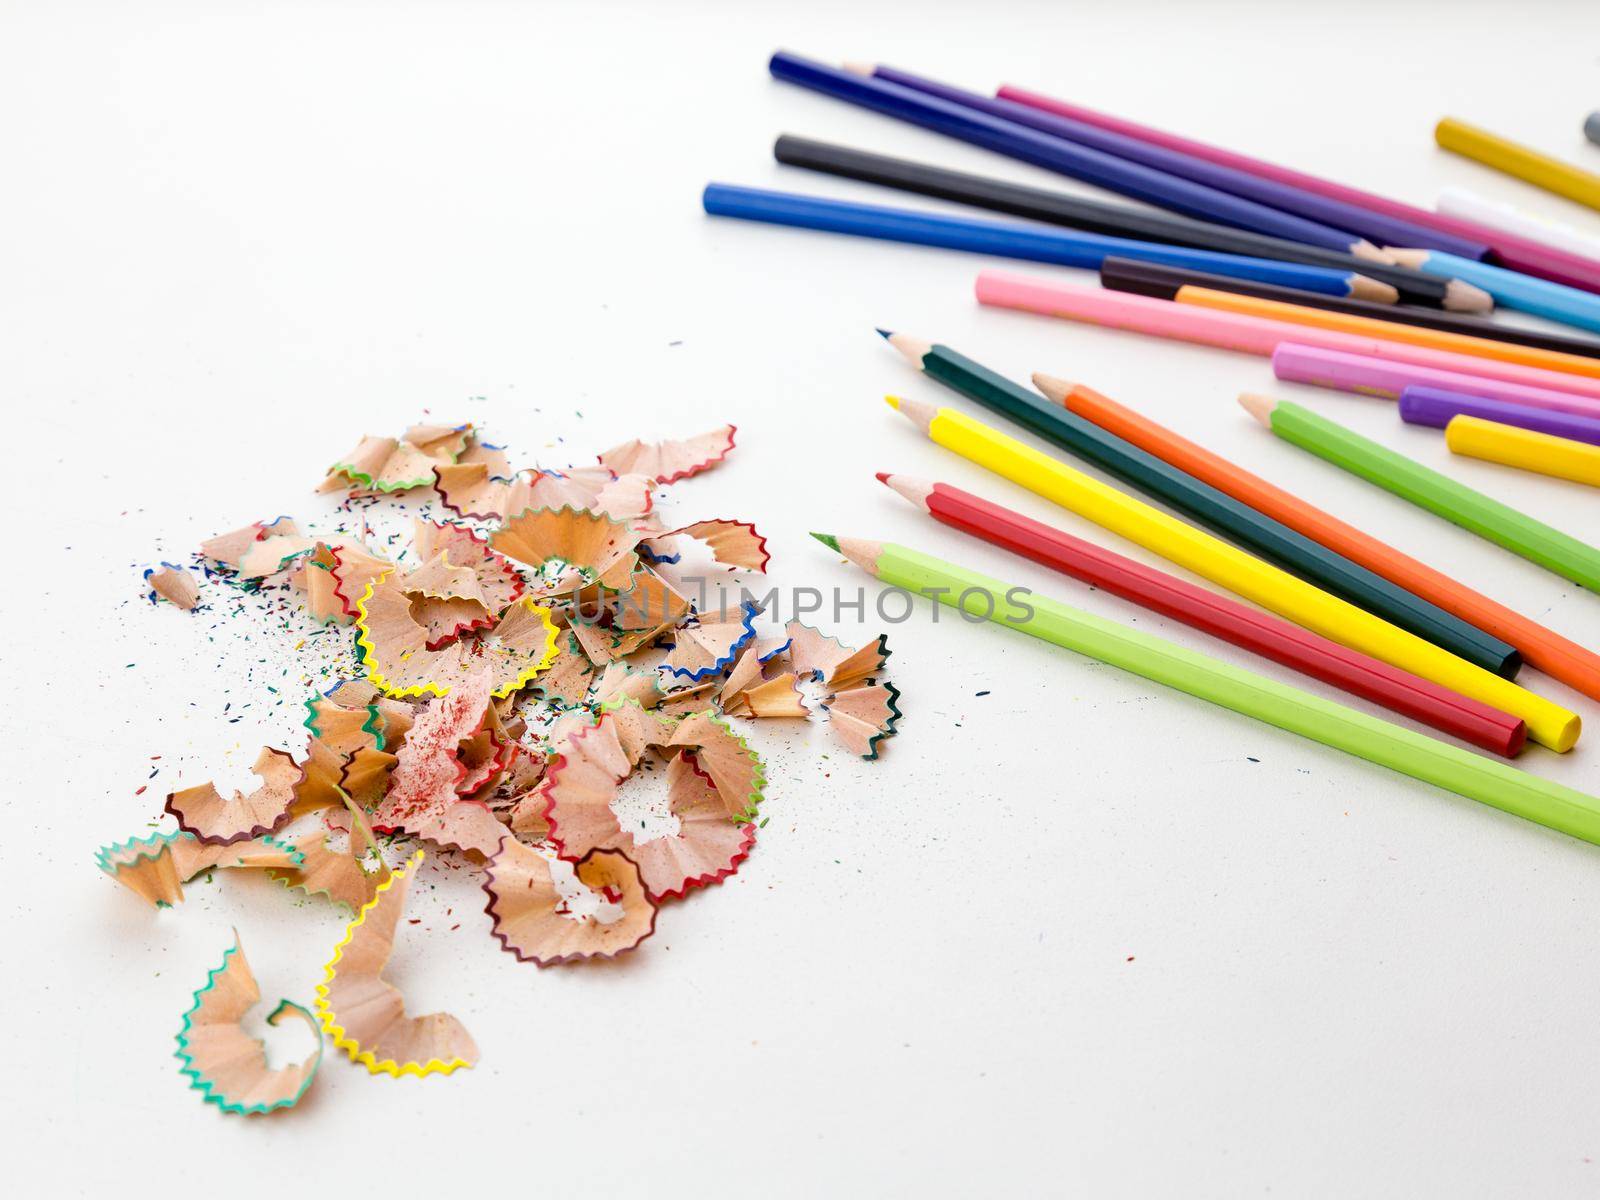 Colored pencil crayons in a row with shavings by imagesbykenny